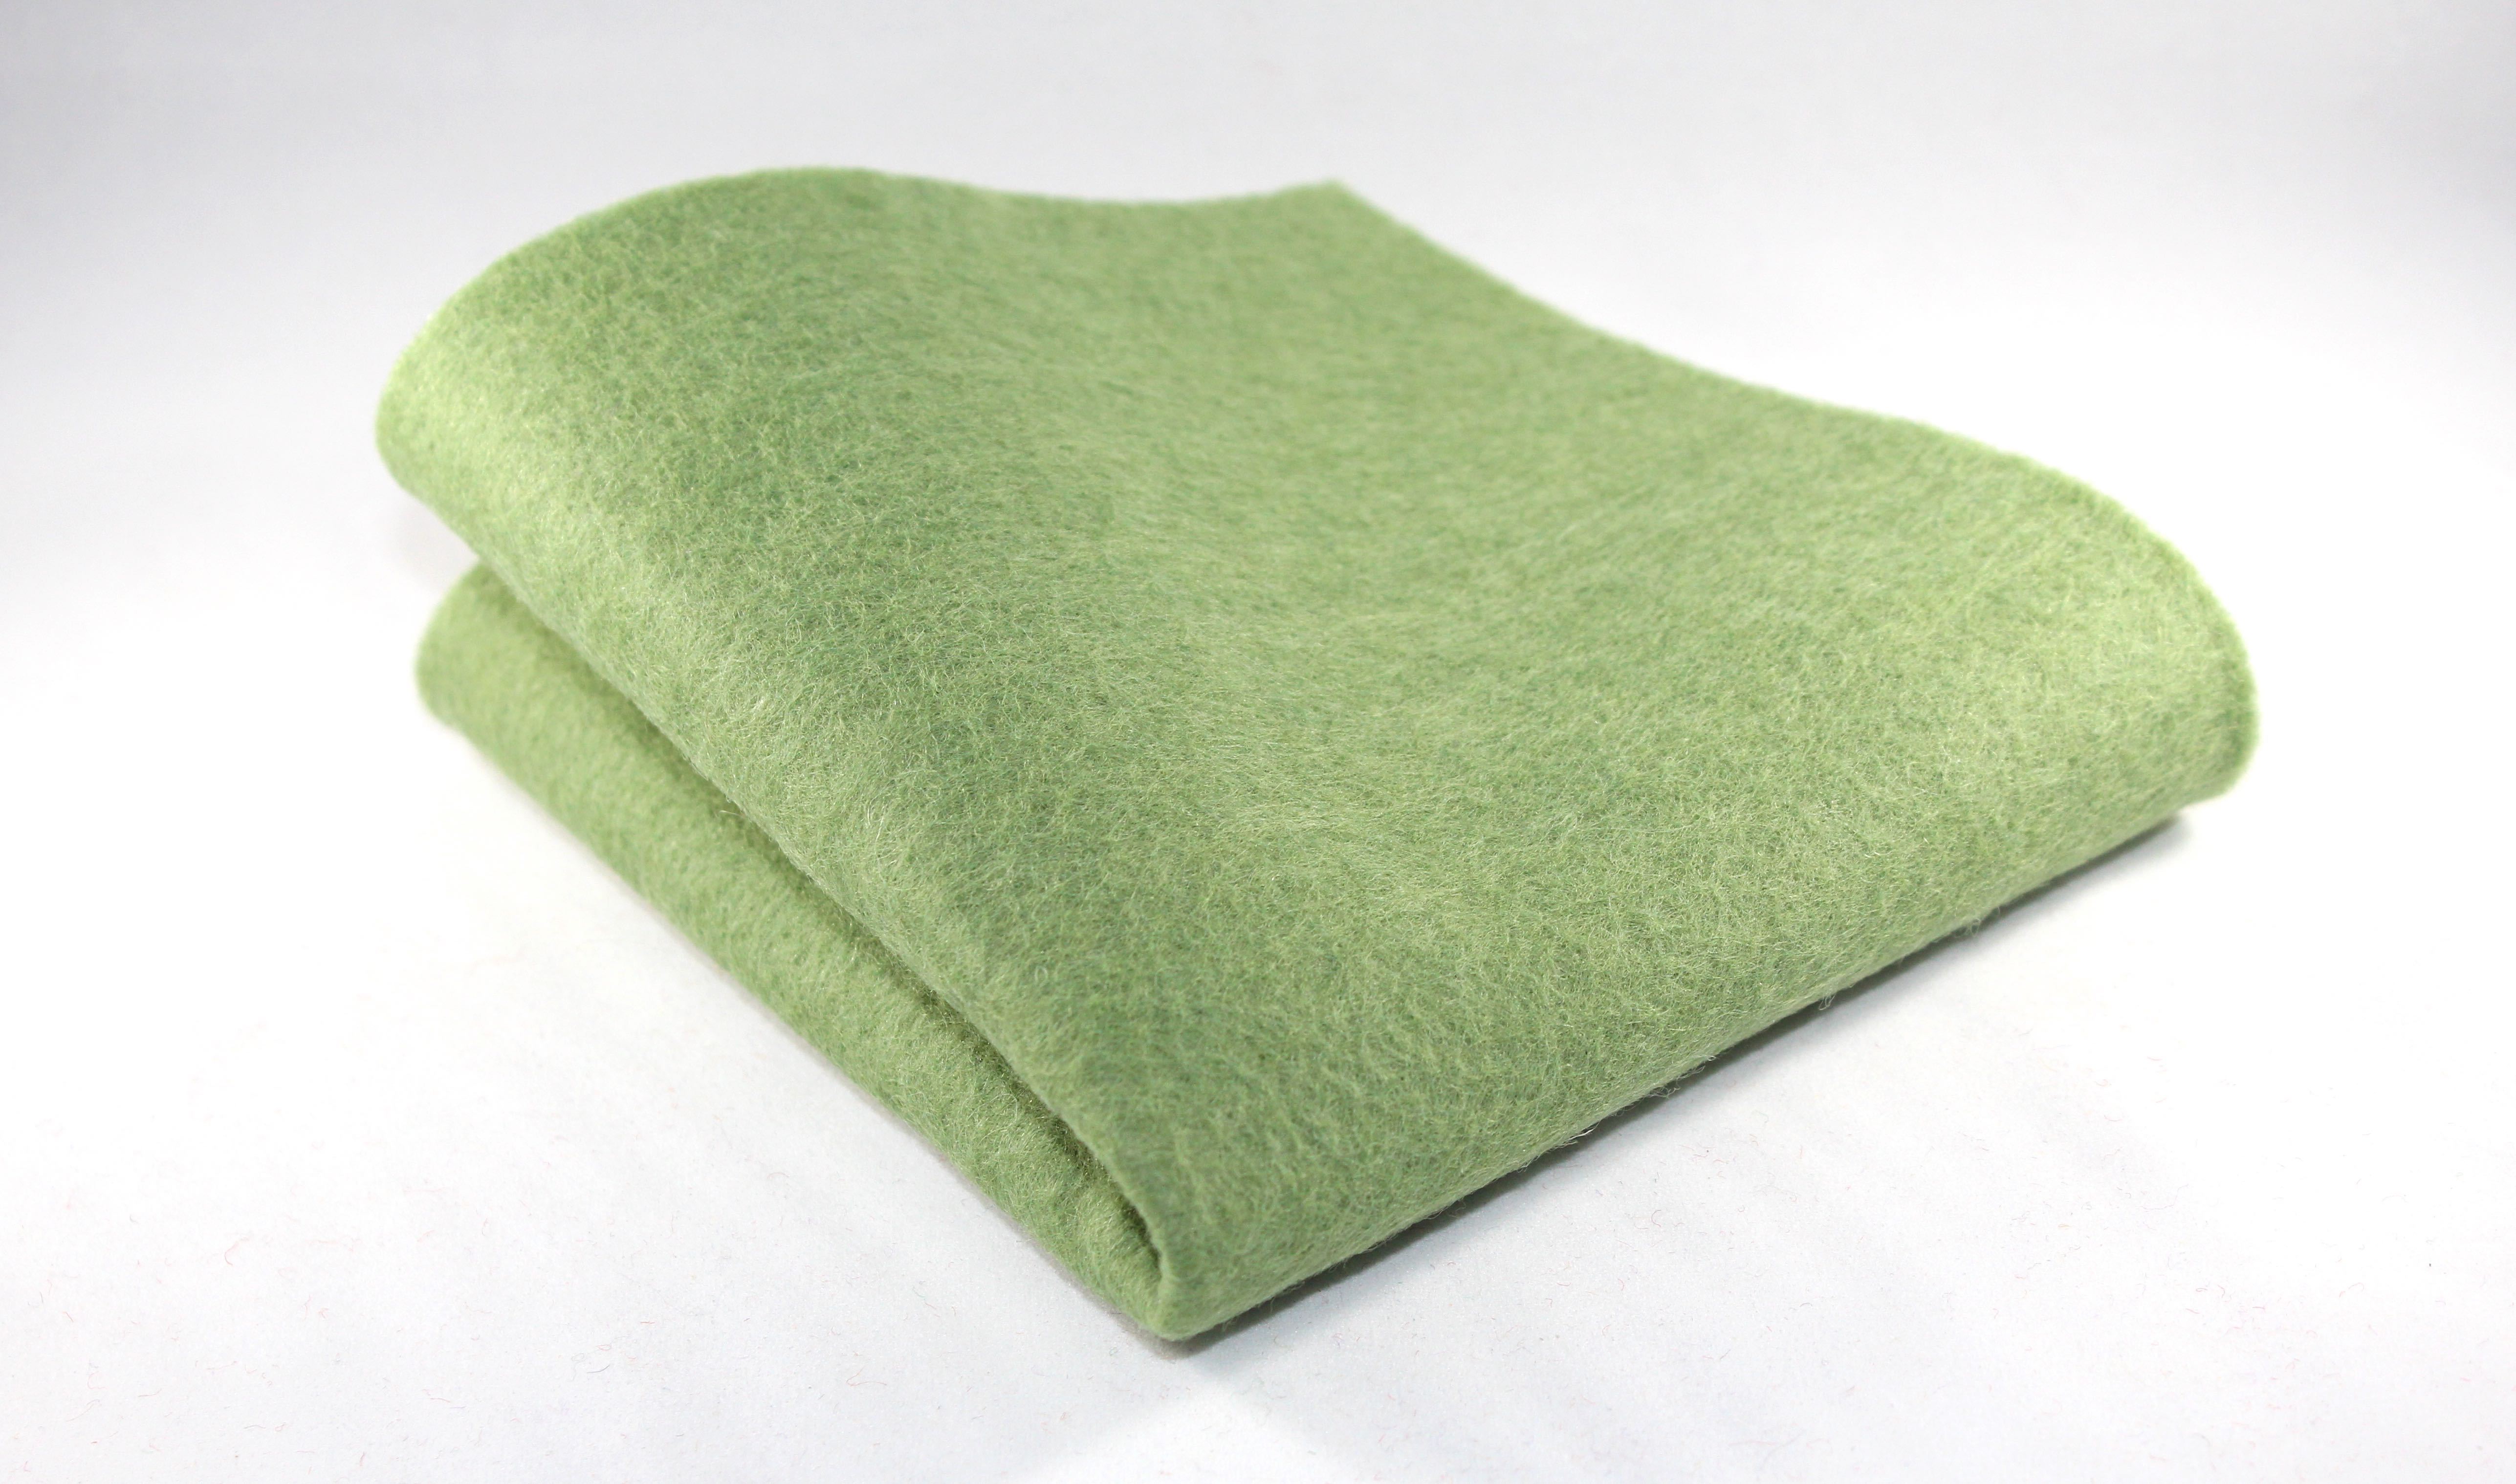 National Nonwovens Homespun Collection 100% Wool Felt - 9 in x 12 in